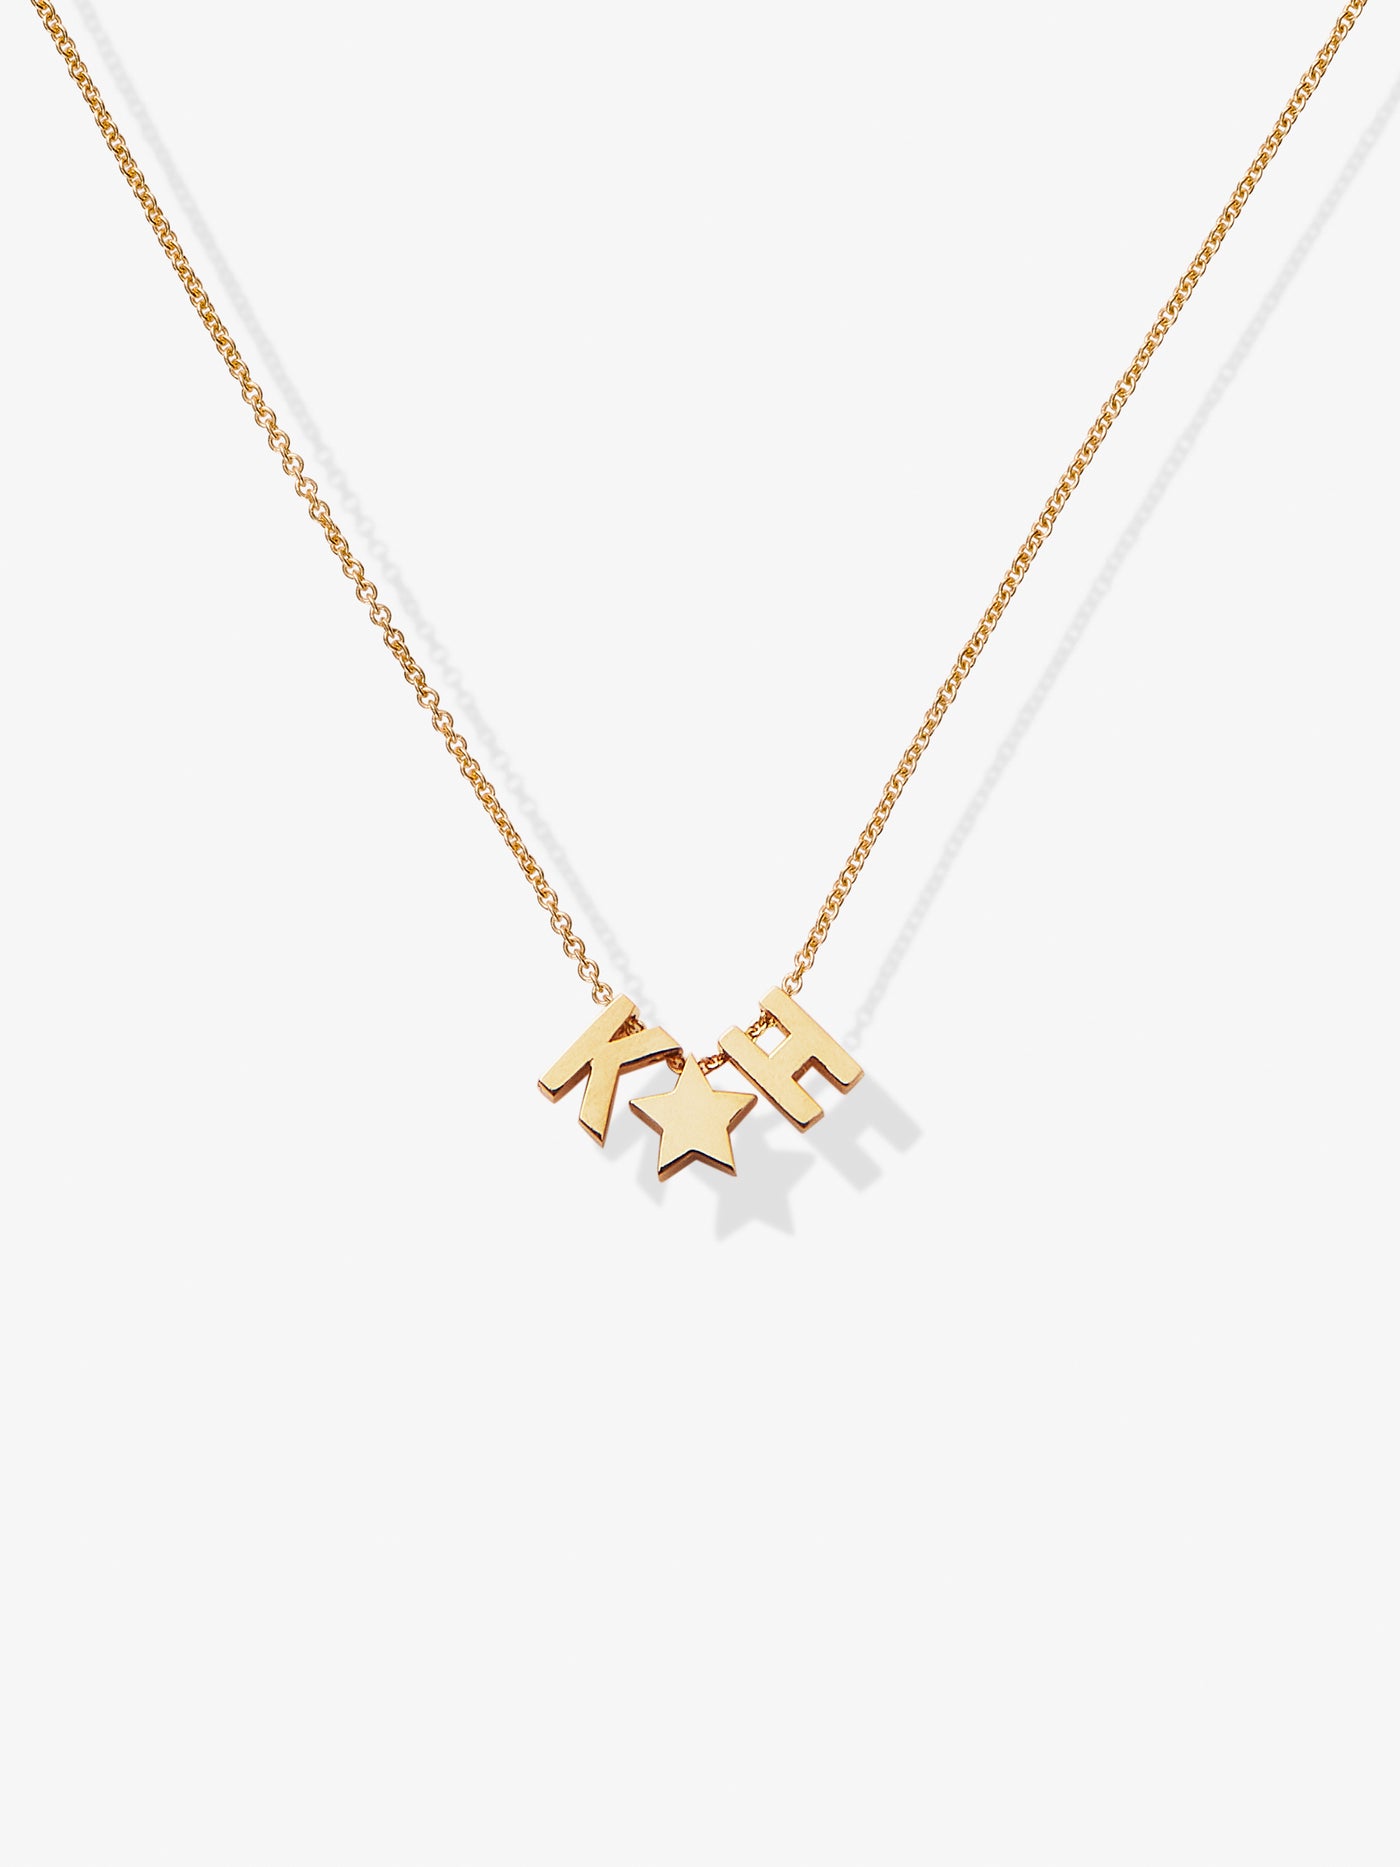 Two Letters and Star Necklace in 18k Gold